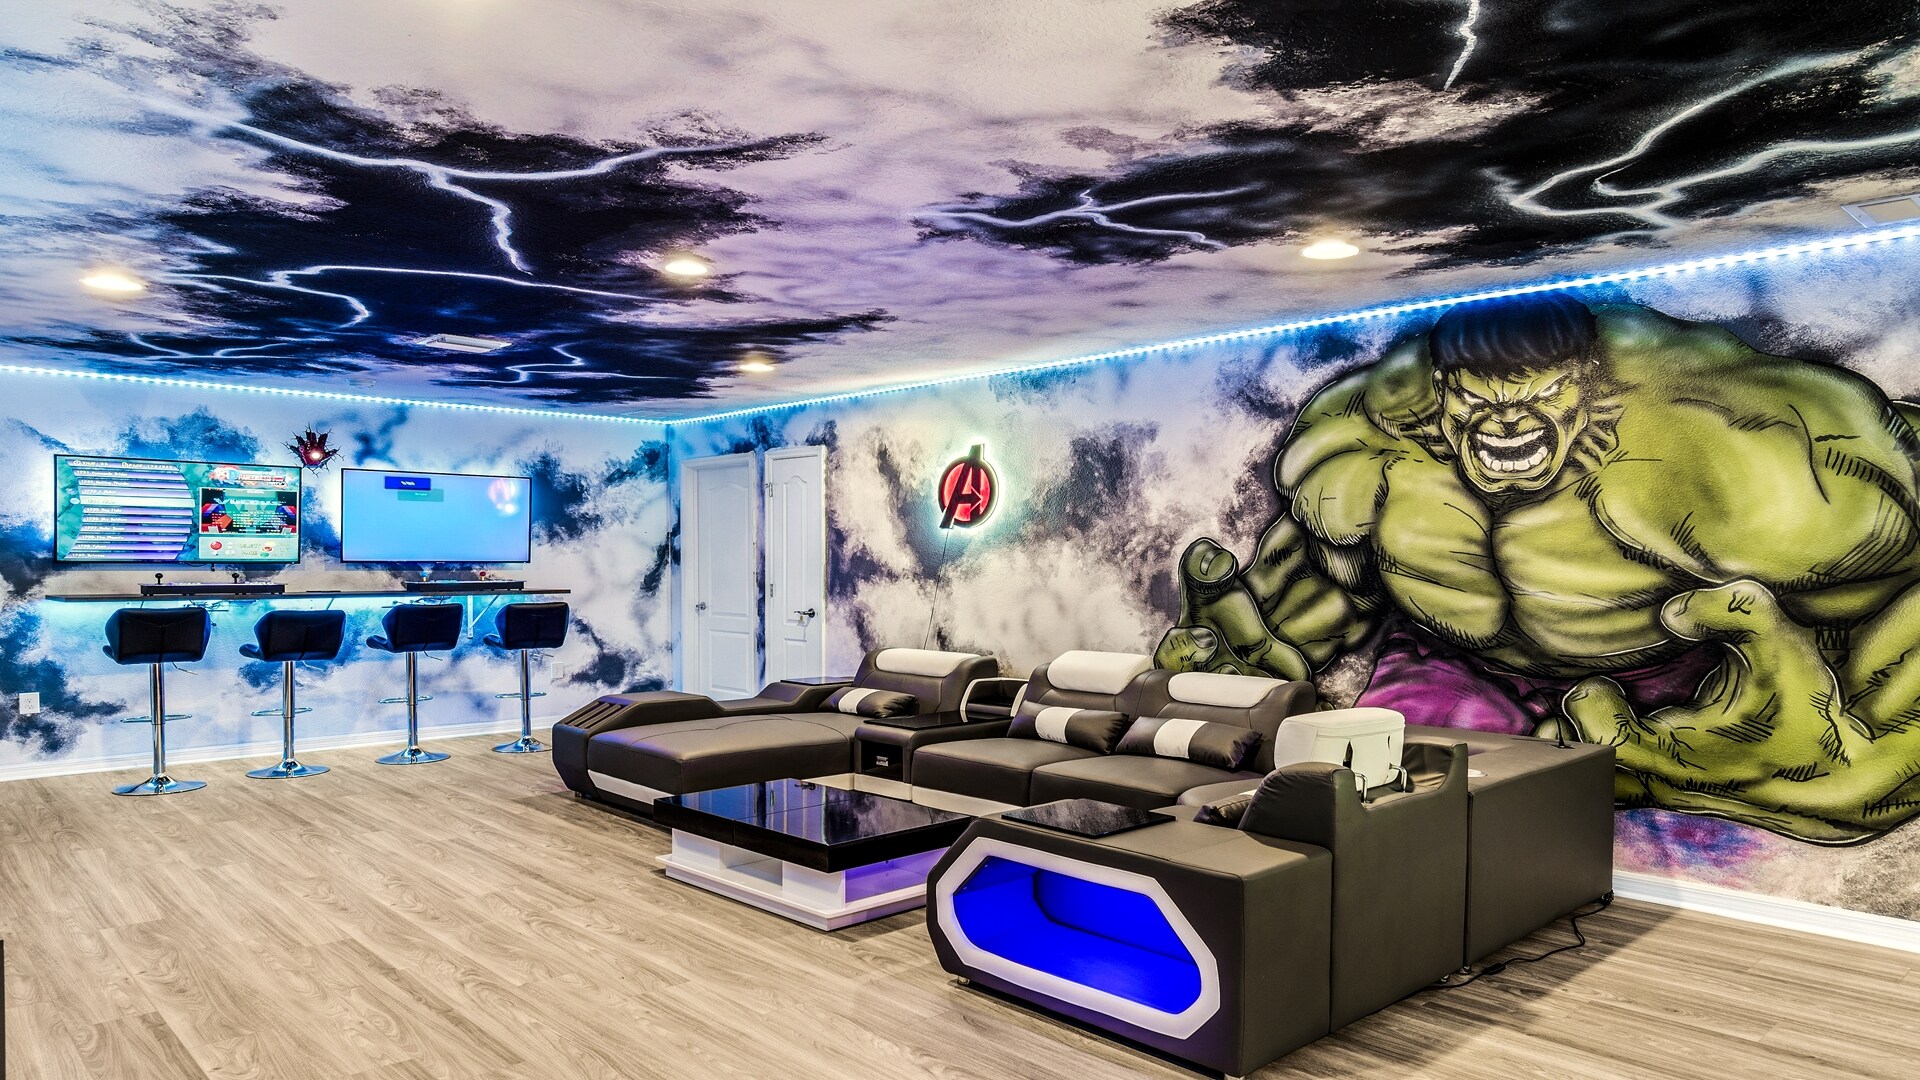 Marvel themed loft room with 3 large screen TVs and a bar seating area.